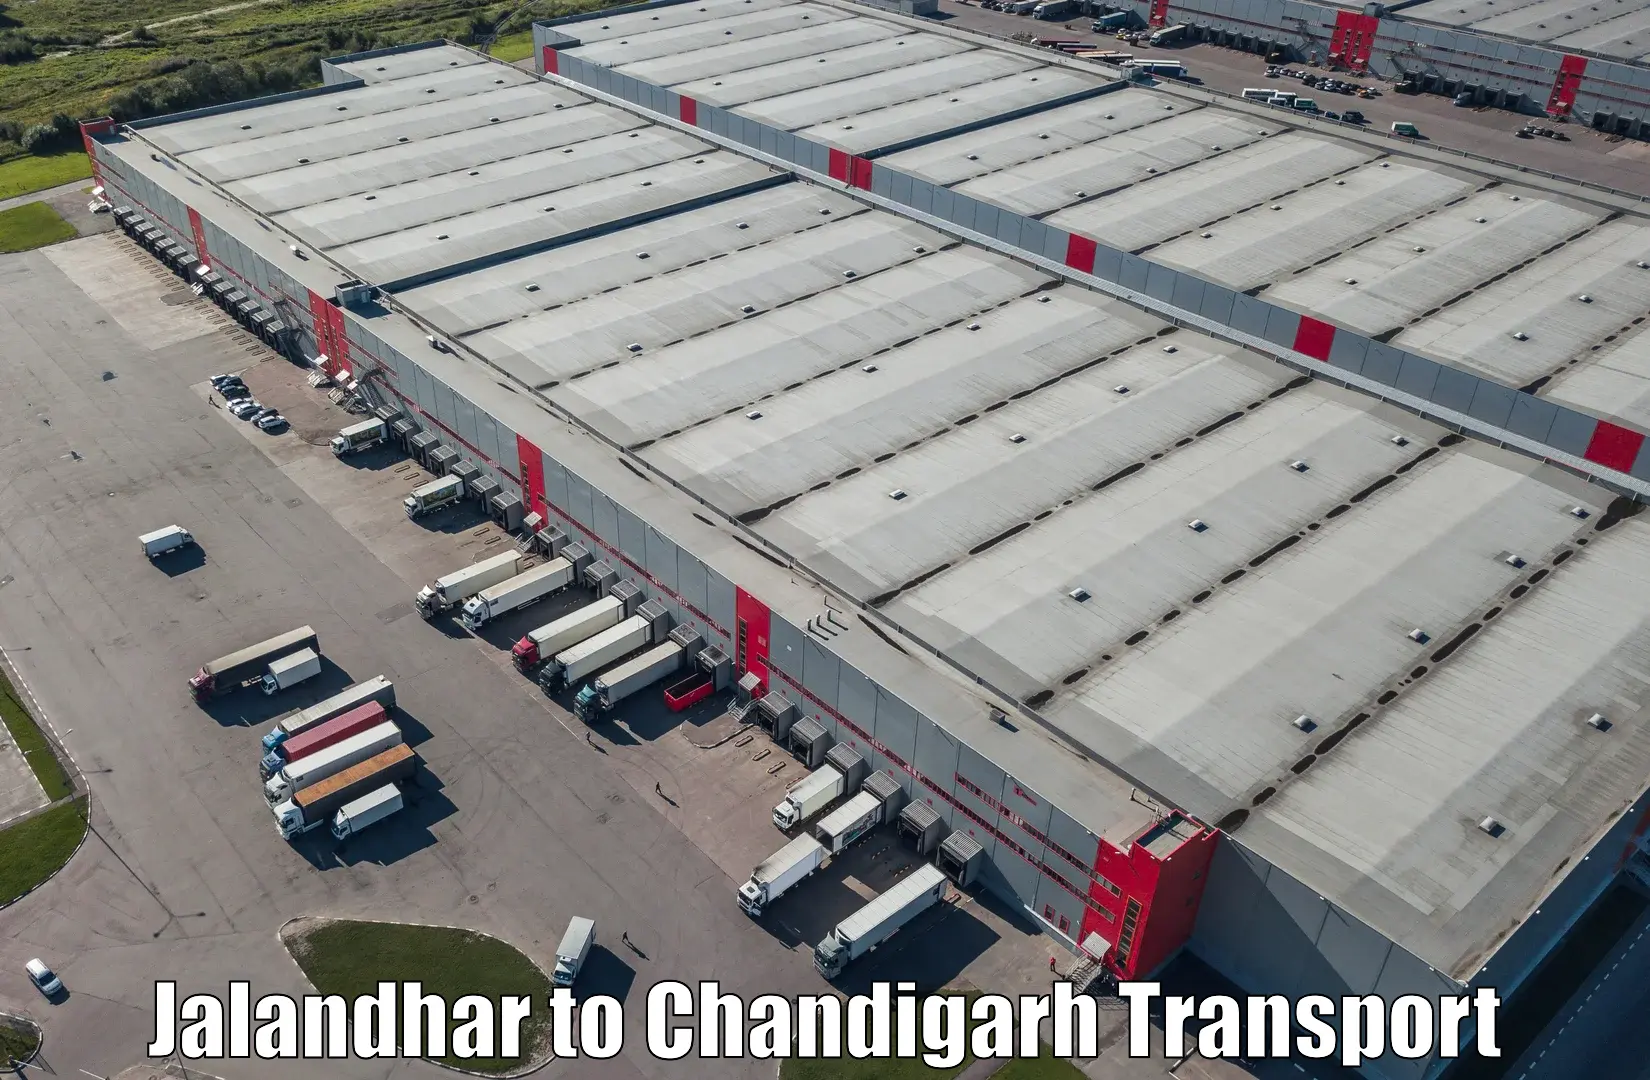 Transport bike from one state to another Jalandhar to Chandigarh